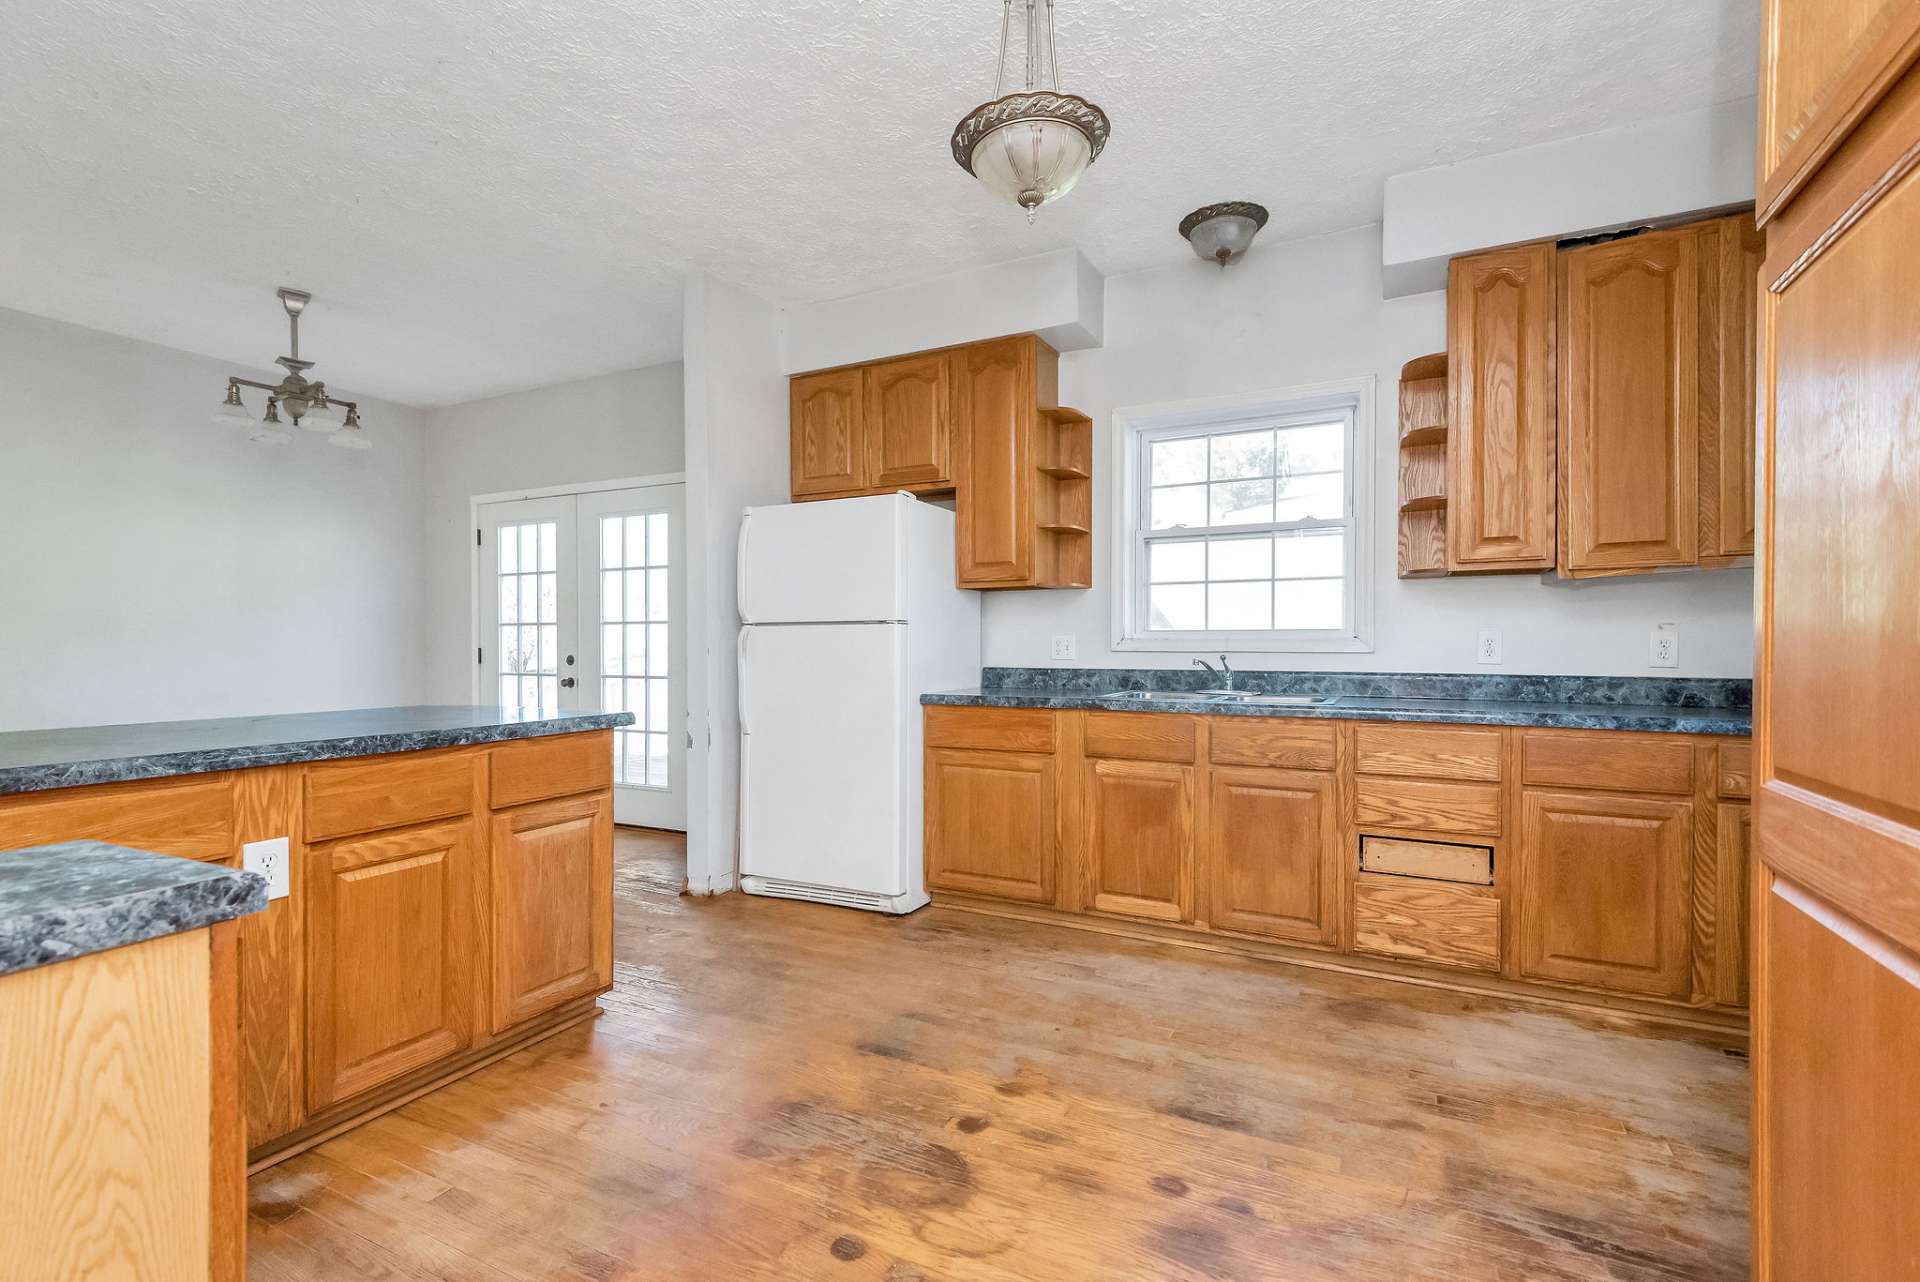 The kitchen provides ample counter and cabinet space, perfect for culinary enthusiasts.